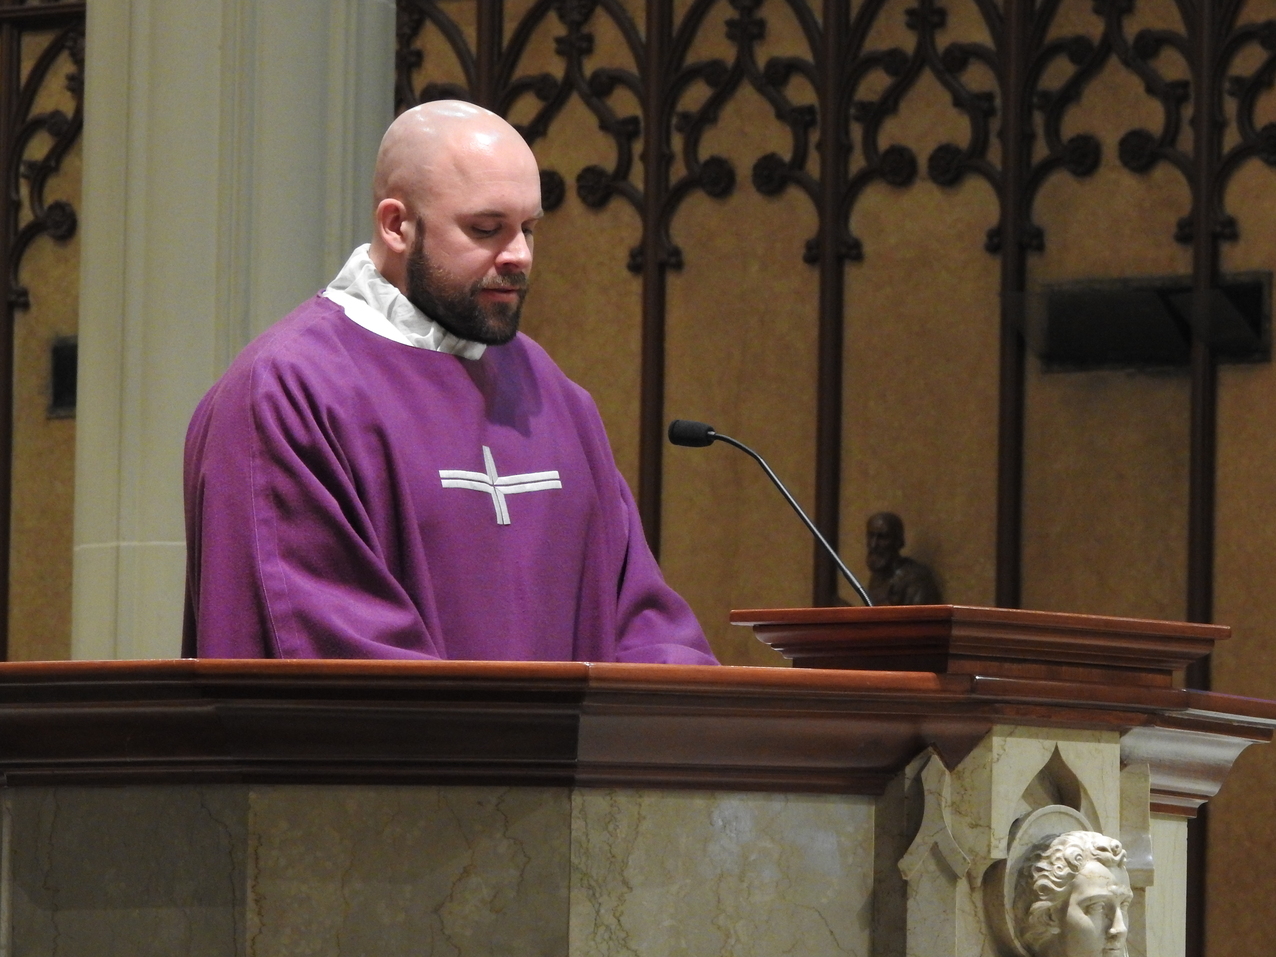 Catechumens, candidates welcomed at Rite of Election liturgies 